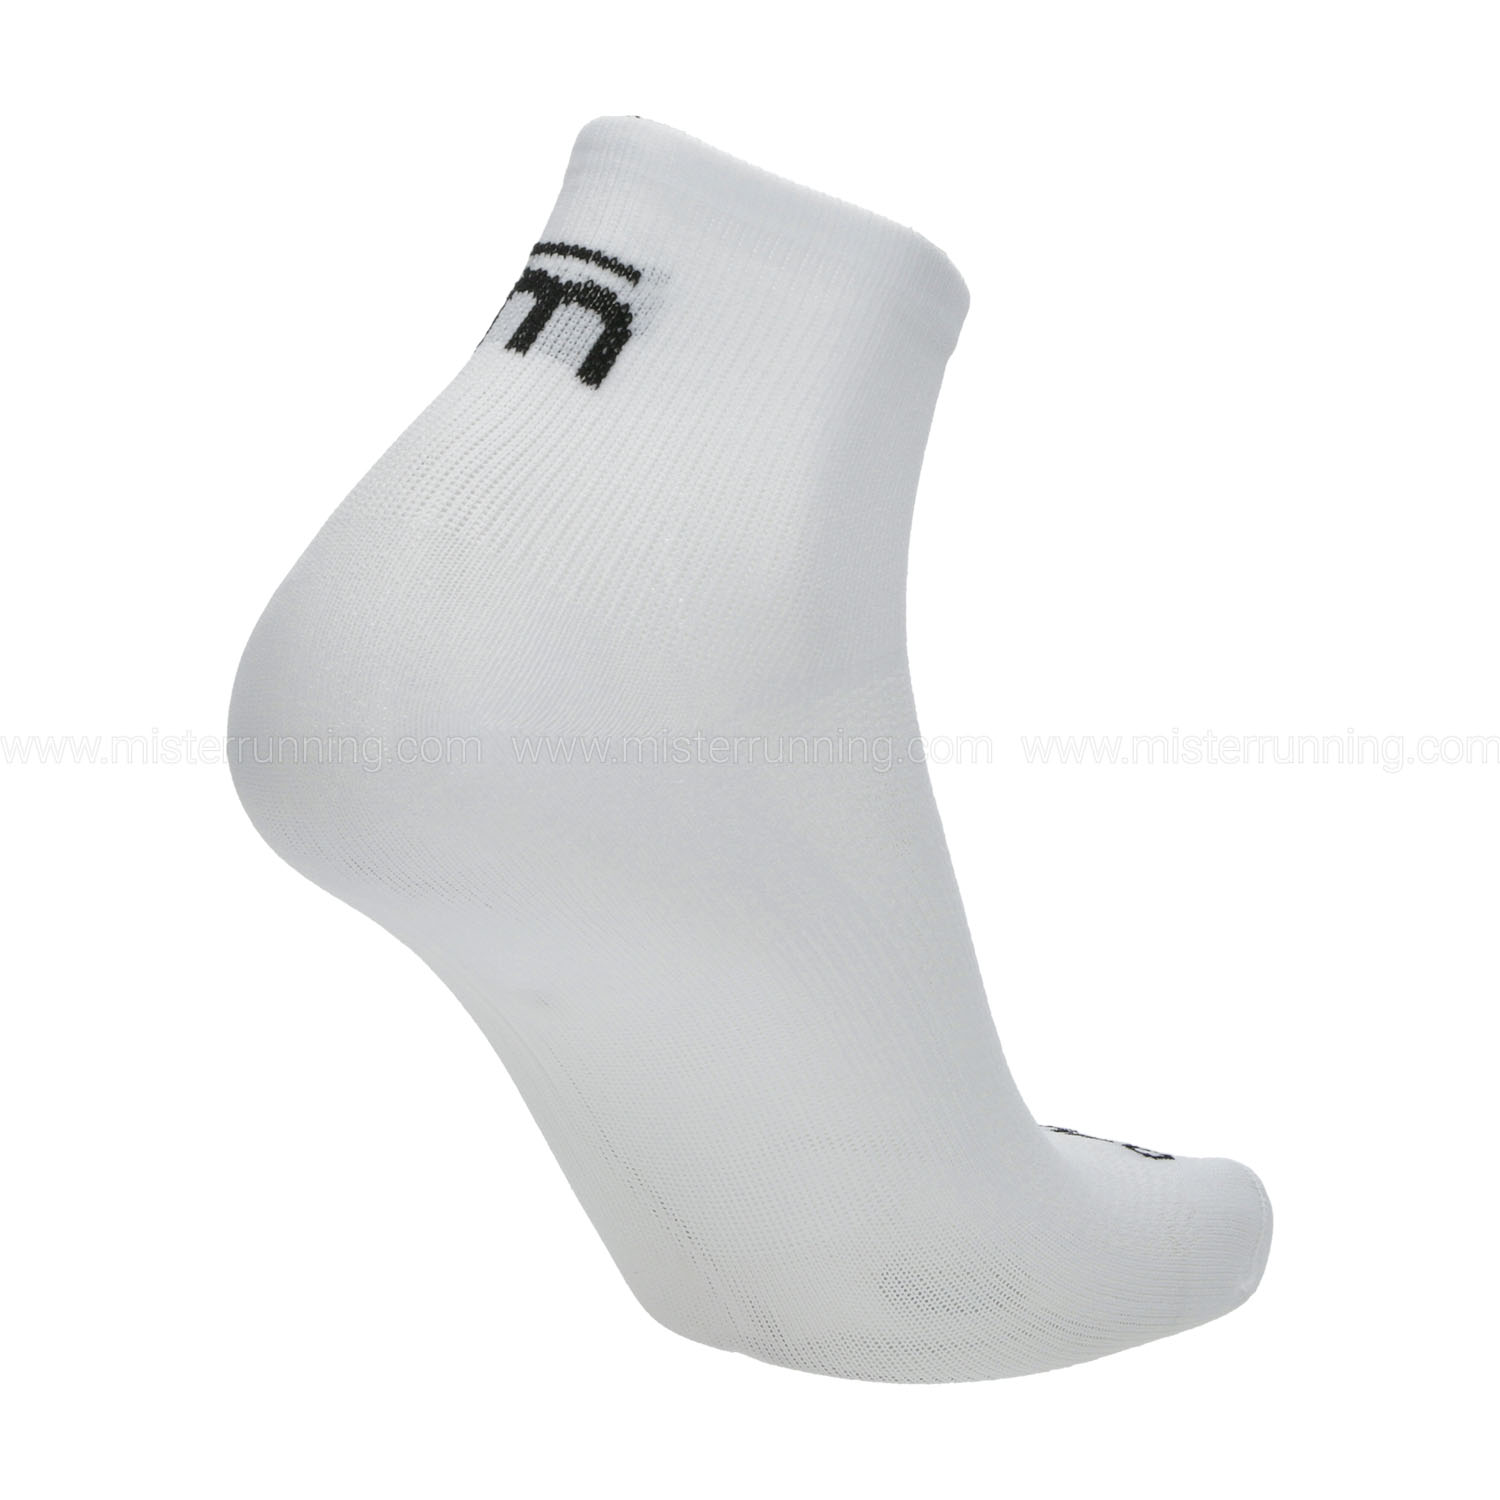 Mico Light Weight Pro x 3 Calcetines - Bianco